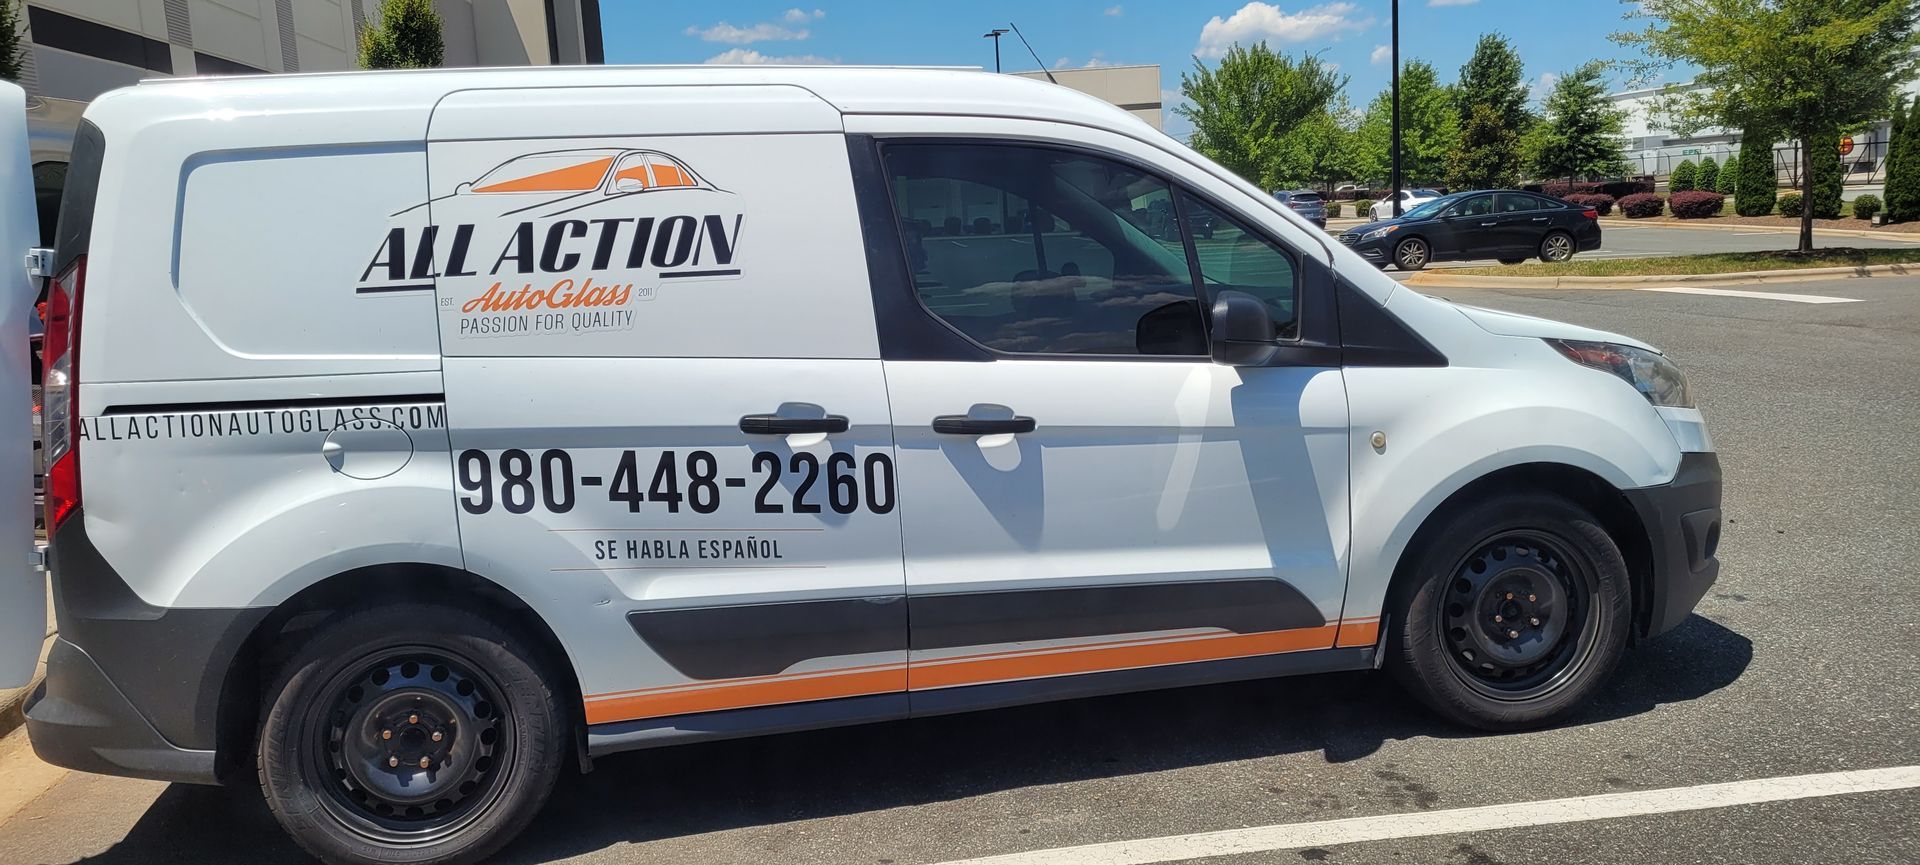 All Action Glass Mobile Auto Glass Service in Gastonia, NC